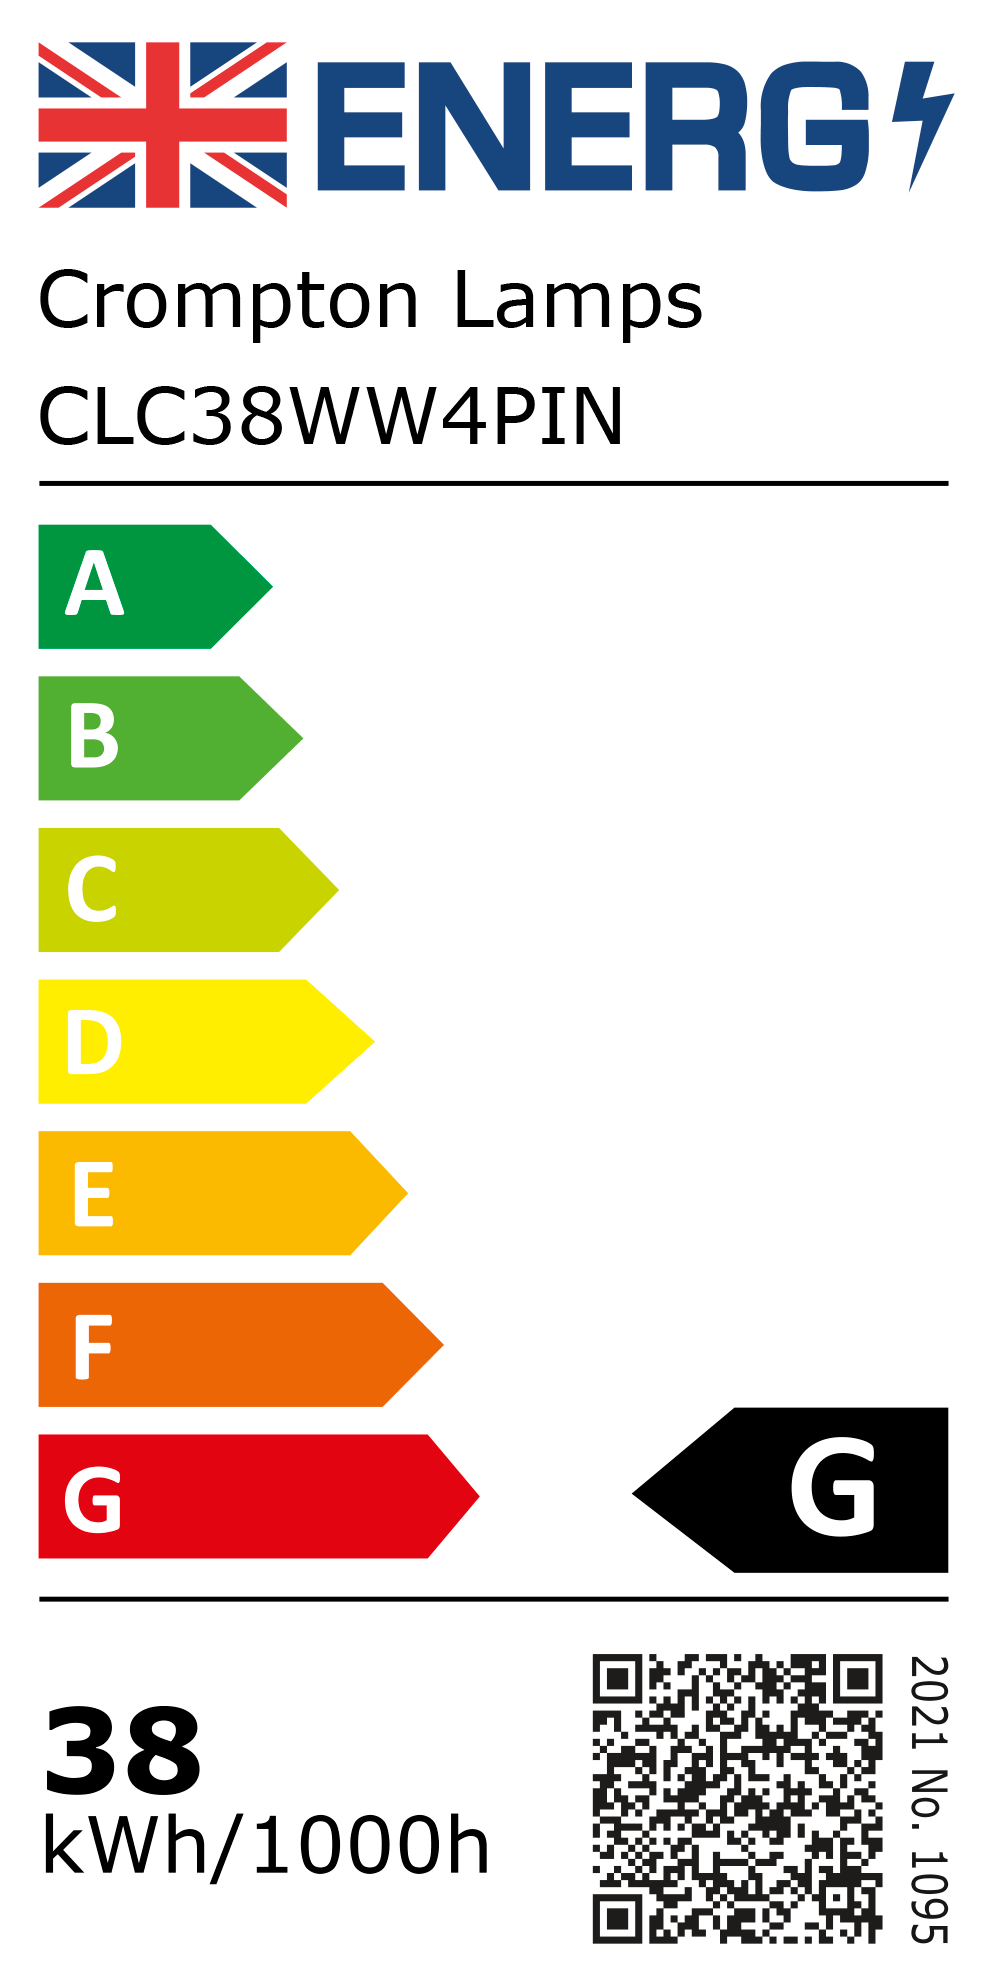 New 2021 Energy Rating Label: Stock Code CLC38WW4PIN